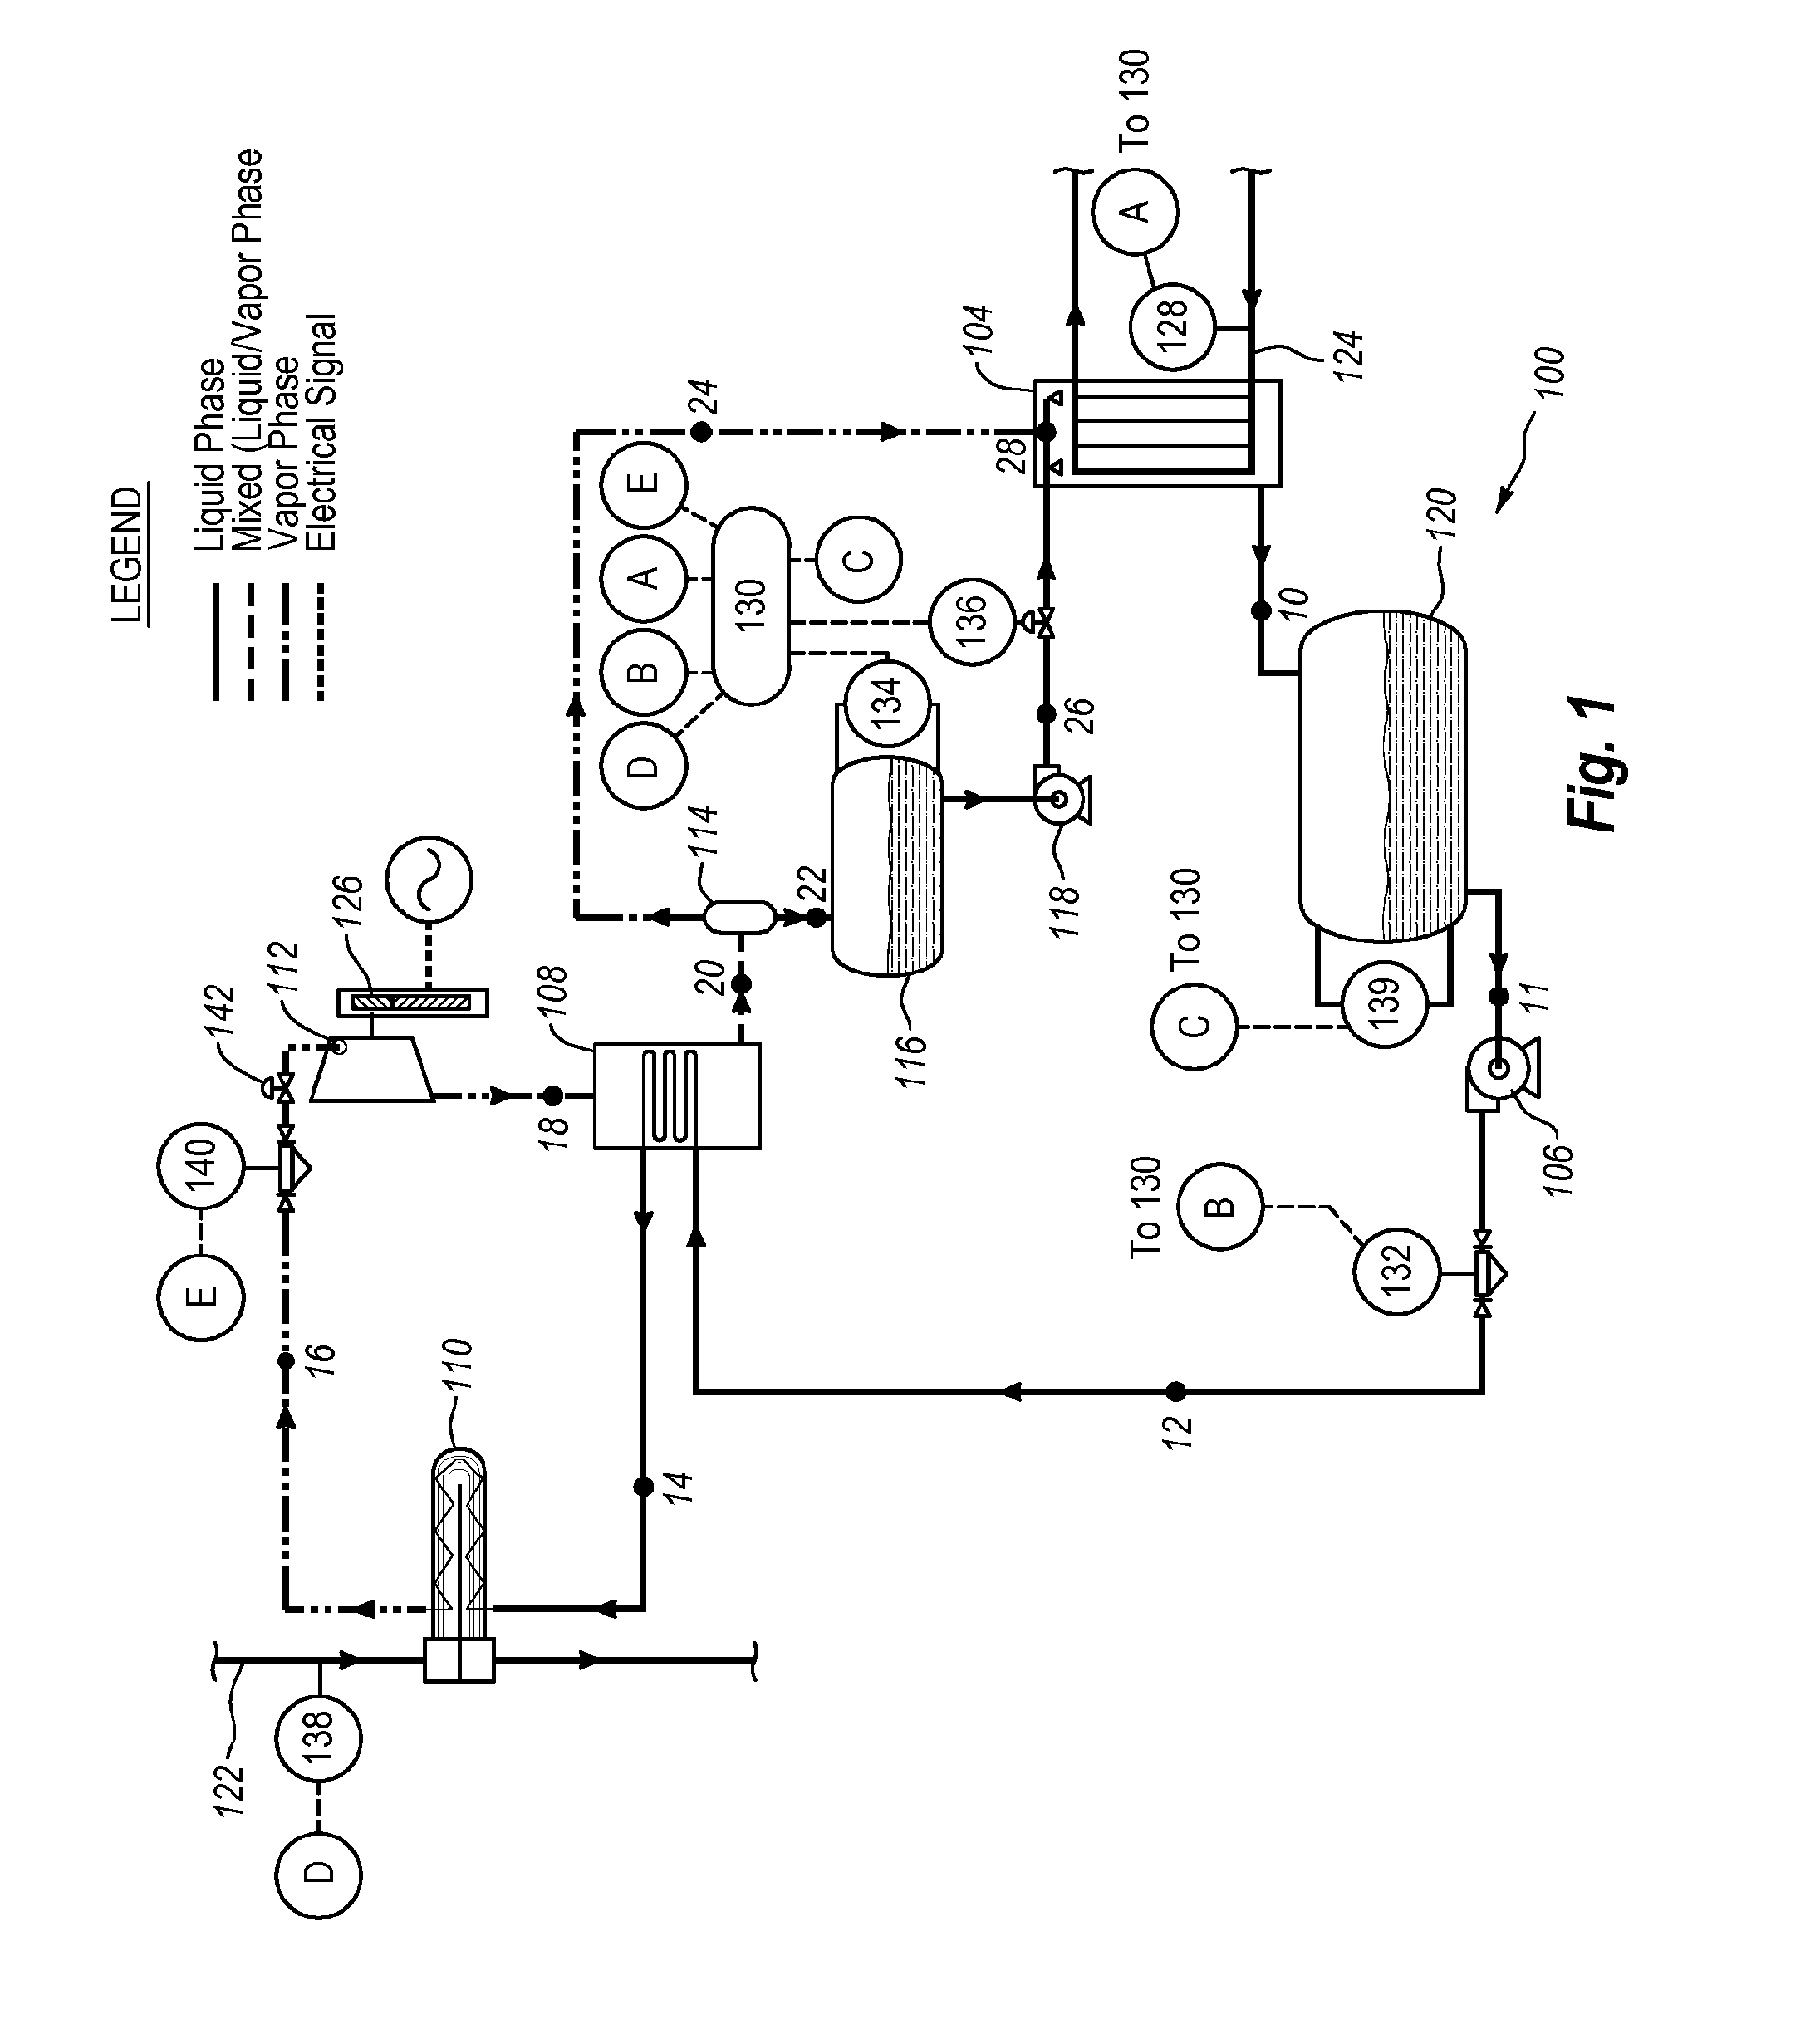 Systems and methods for increasing the efficiency of a kalina cycle